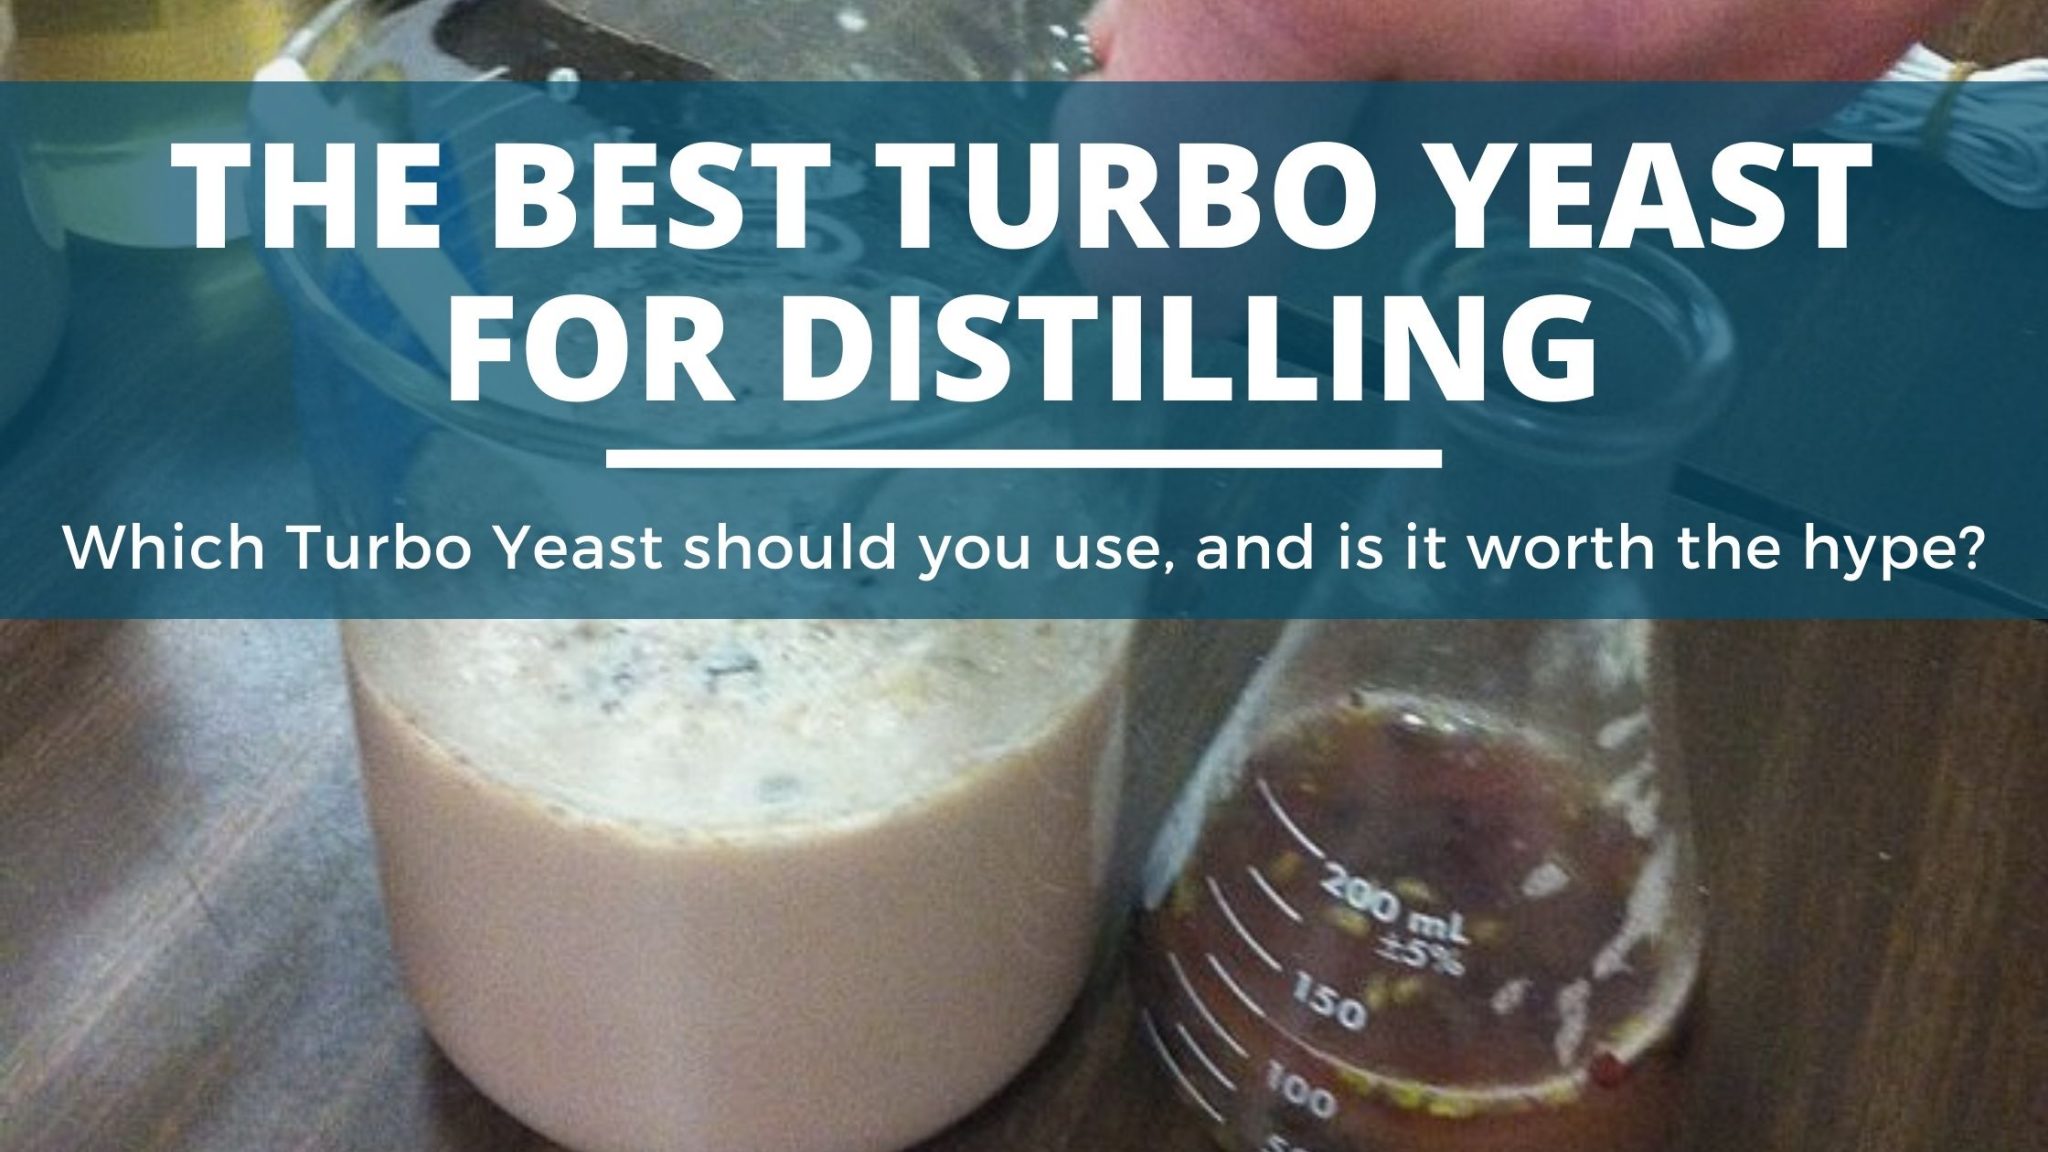 Alcotec Classic 48 Hour Turbo Distillers Yeast Pack of 6 Best Value! 